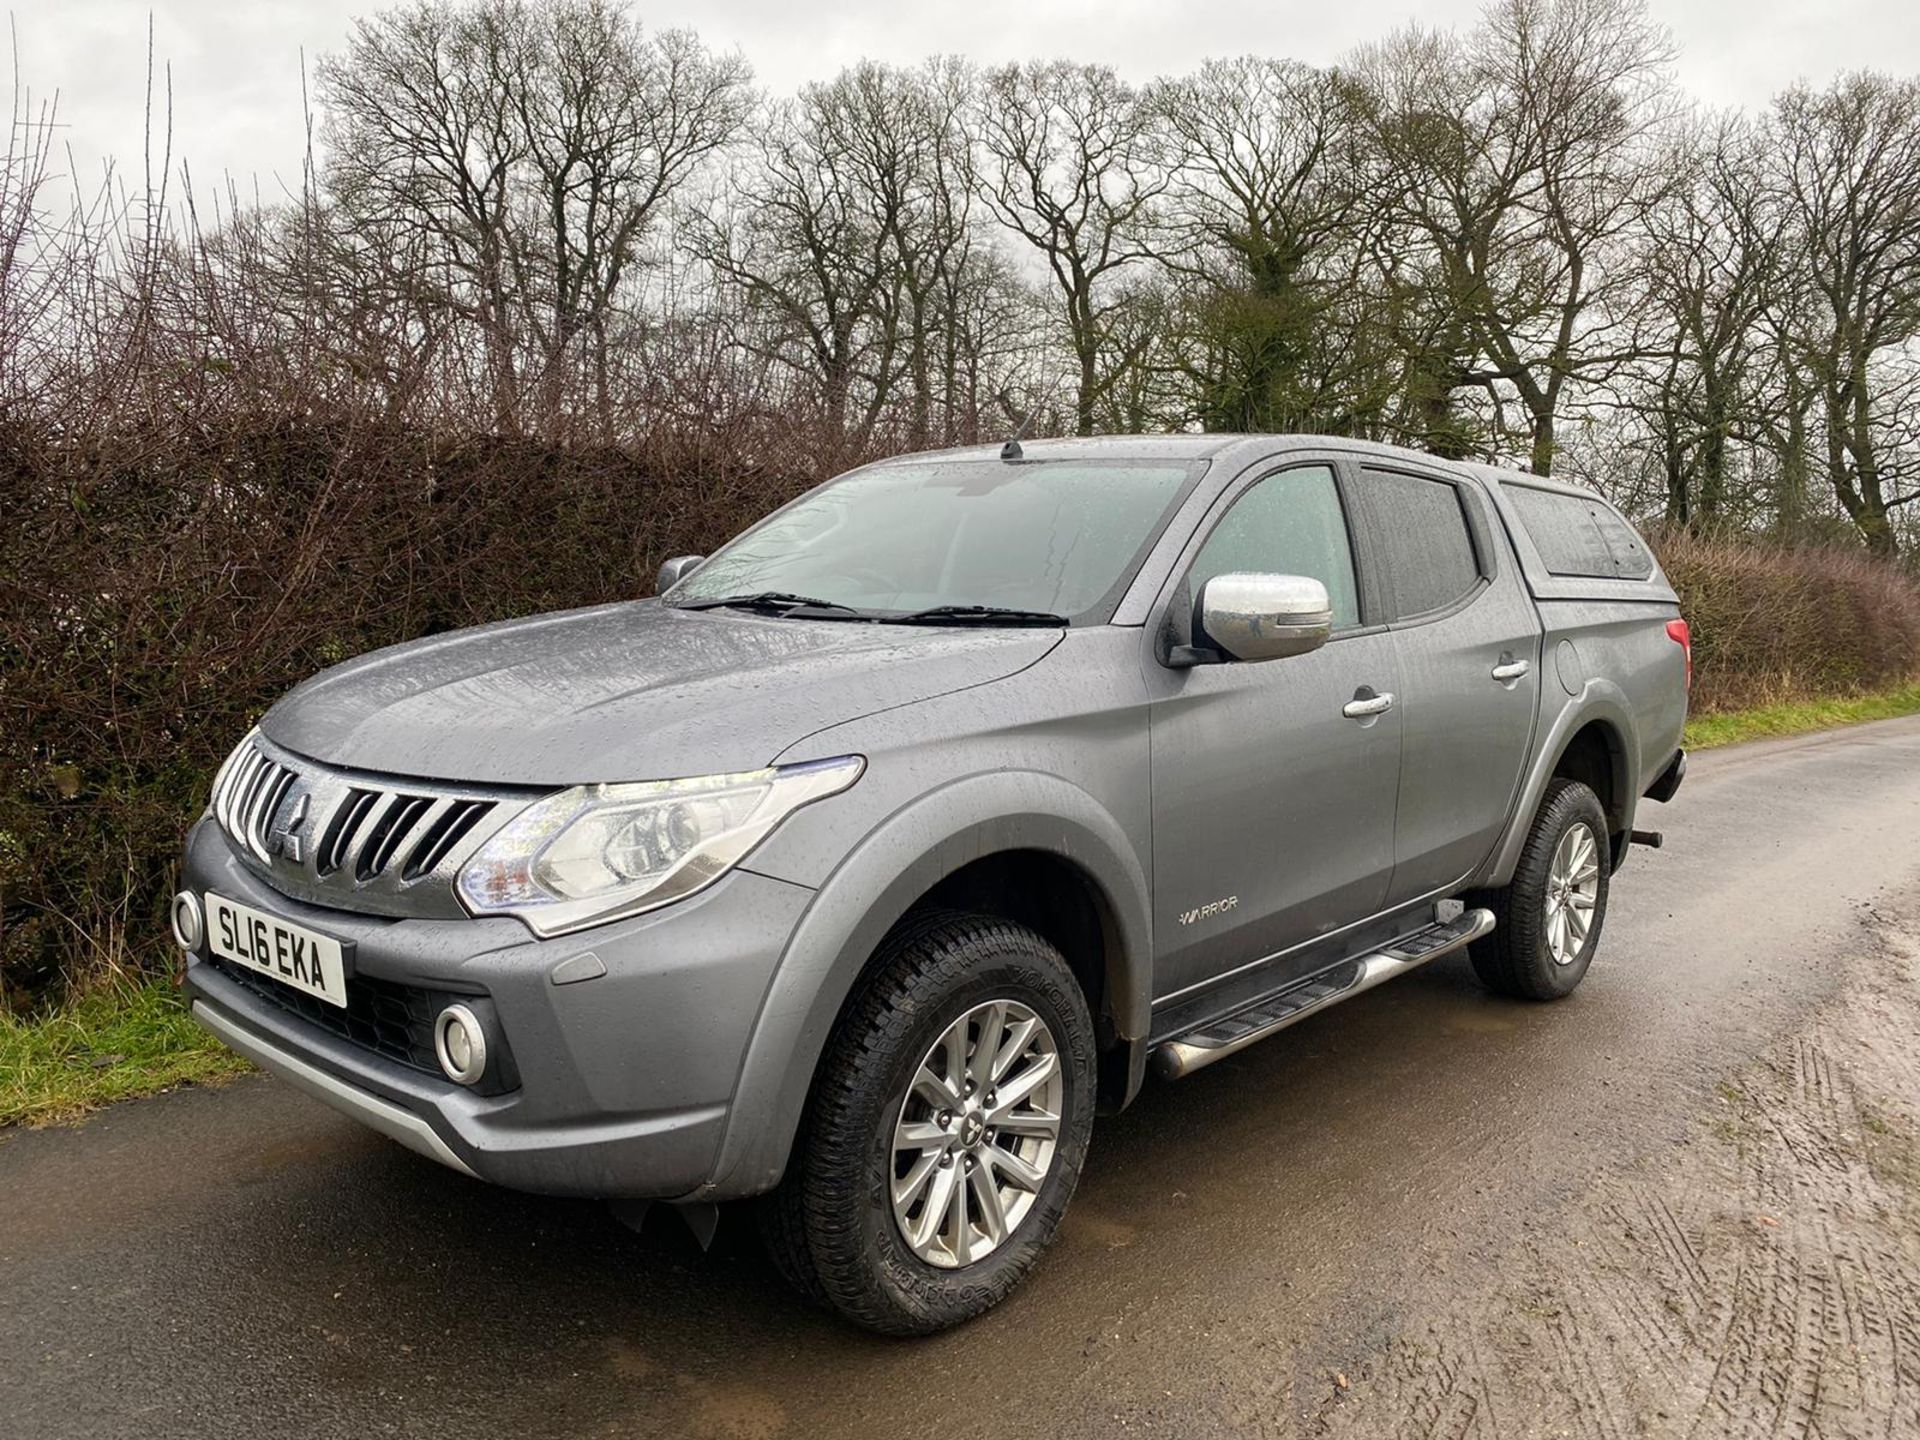 2016/16 REG MITSUBISHI L200 WARRIOR DOUBLE CAB DI-D 2.5 DIESEL PICK-UP, SHOWING 0 FORMER KEEPERS - Image 2 of 8